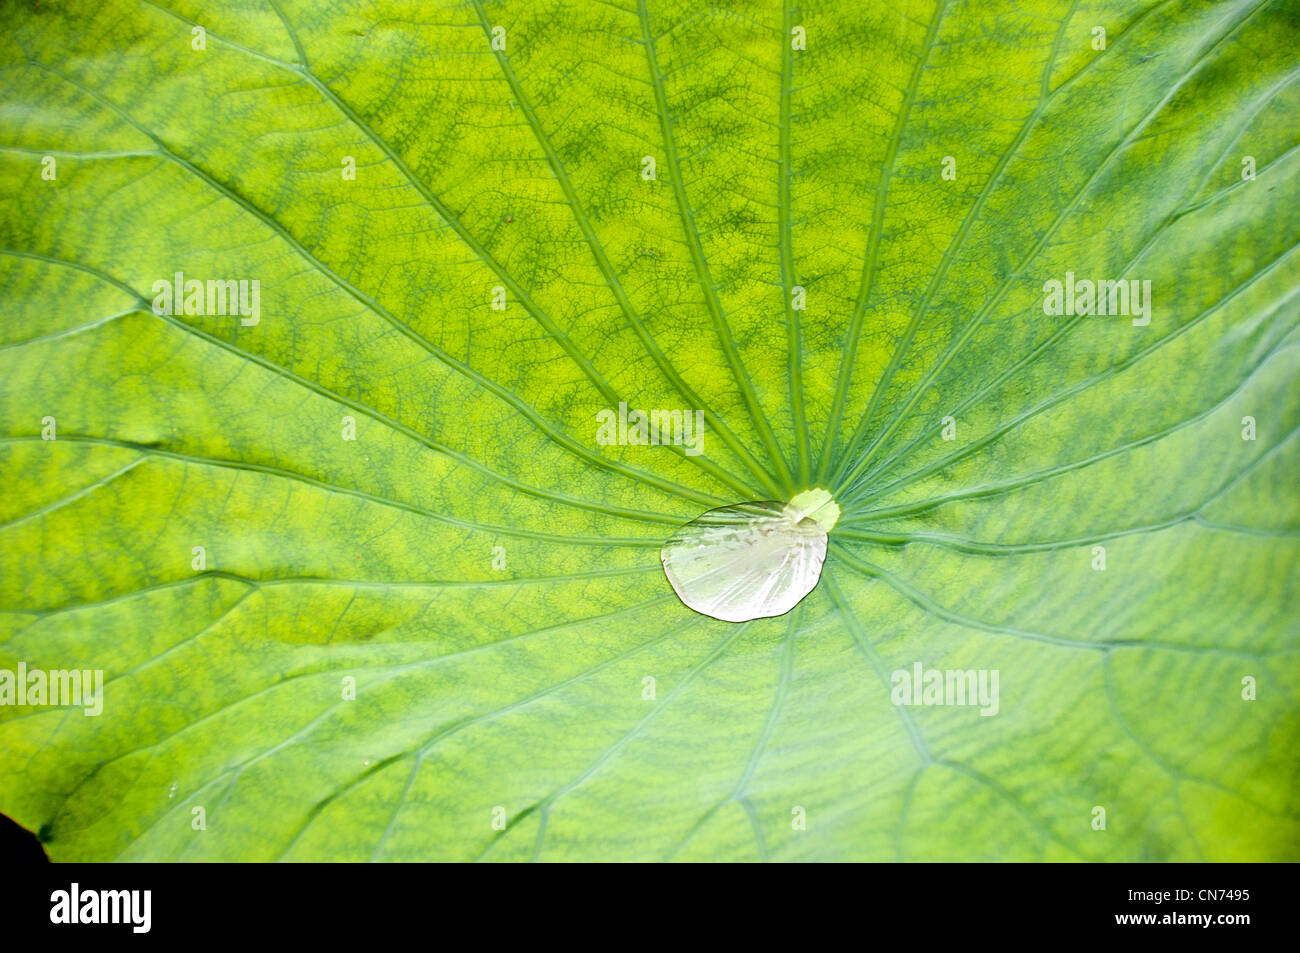 Droplet in a green lotus leaf flower Stock Photo